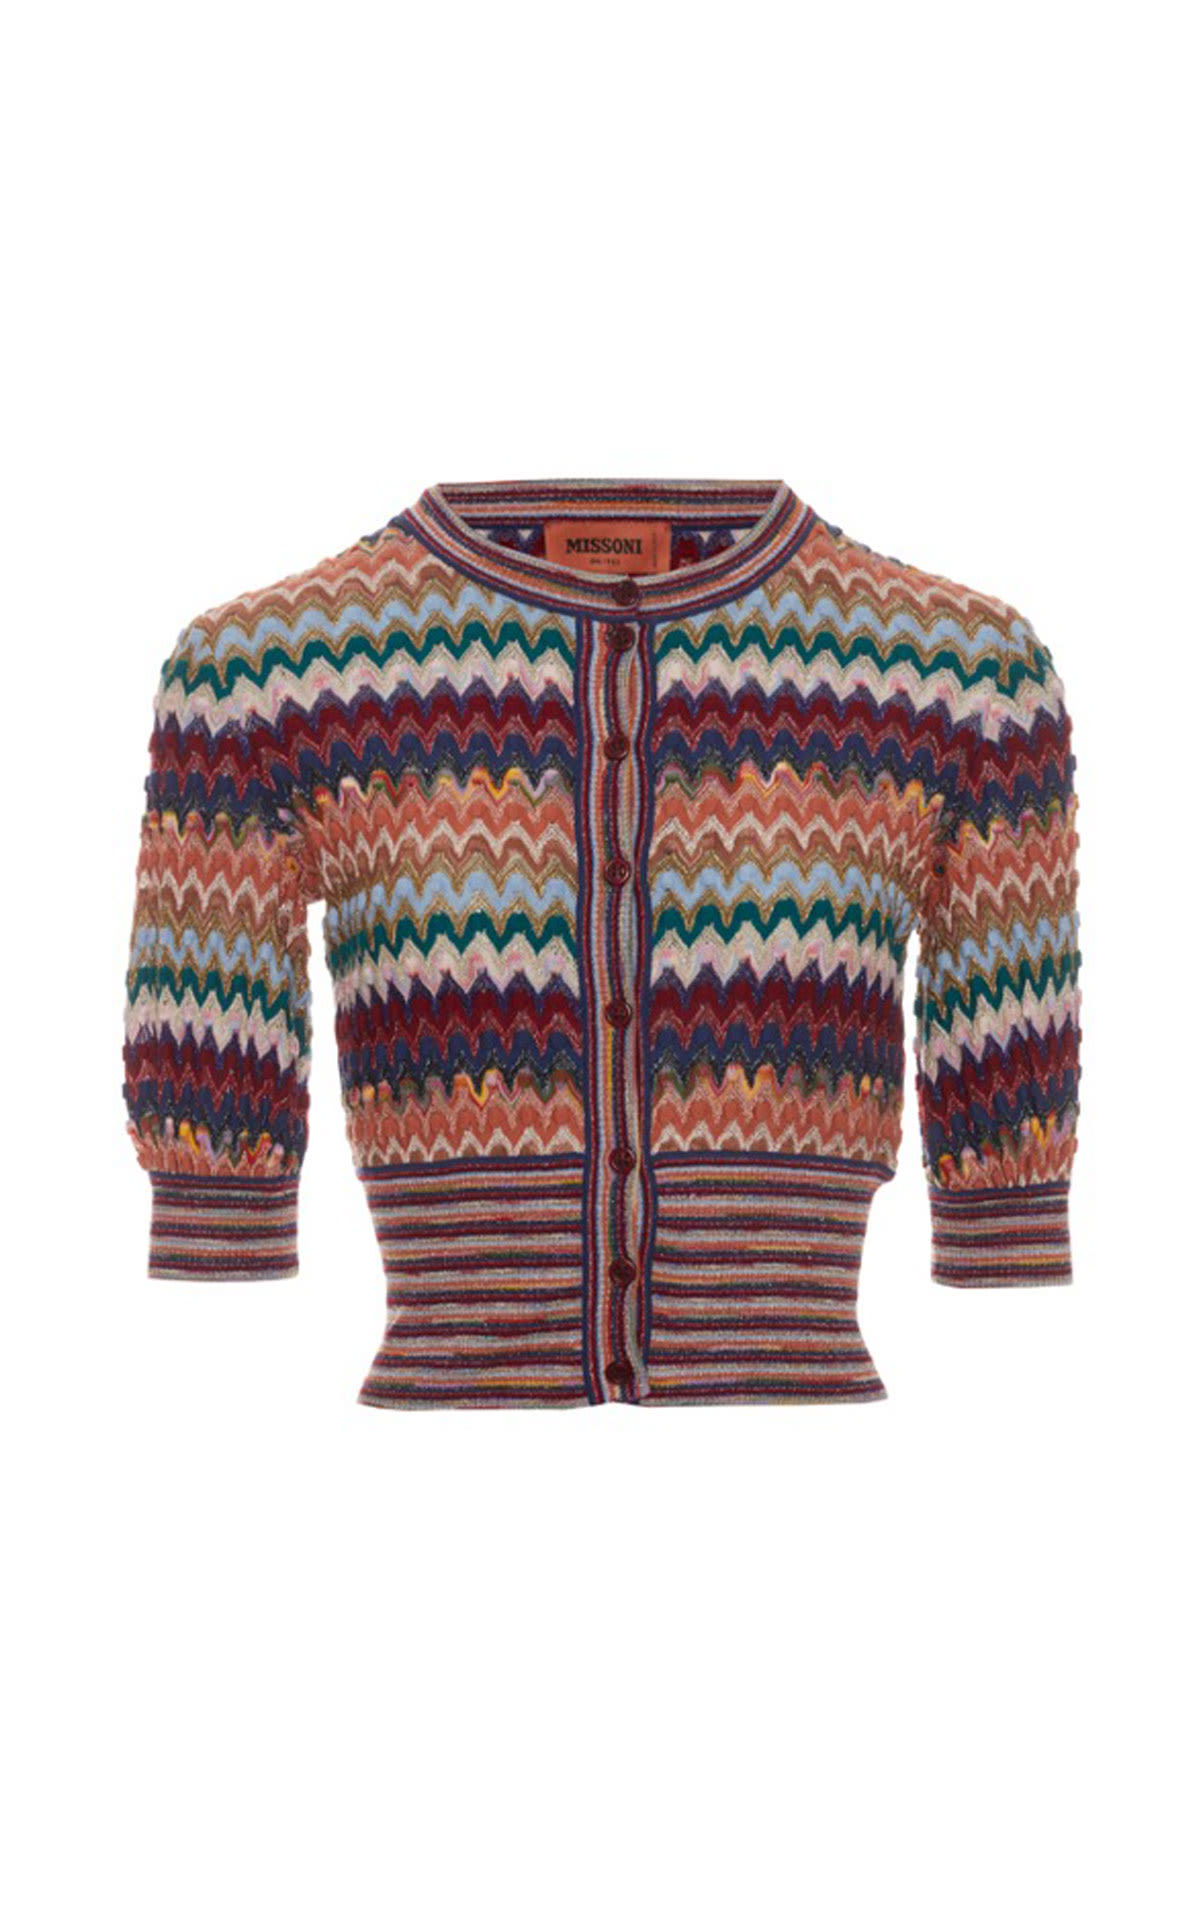 Missoni Striped cardigan from Bicester Village